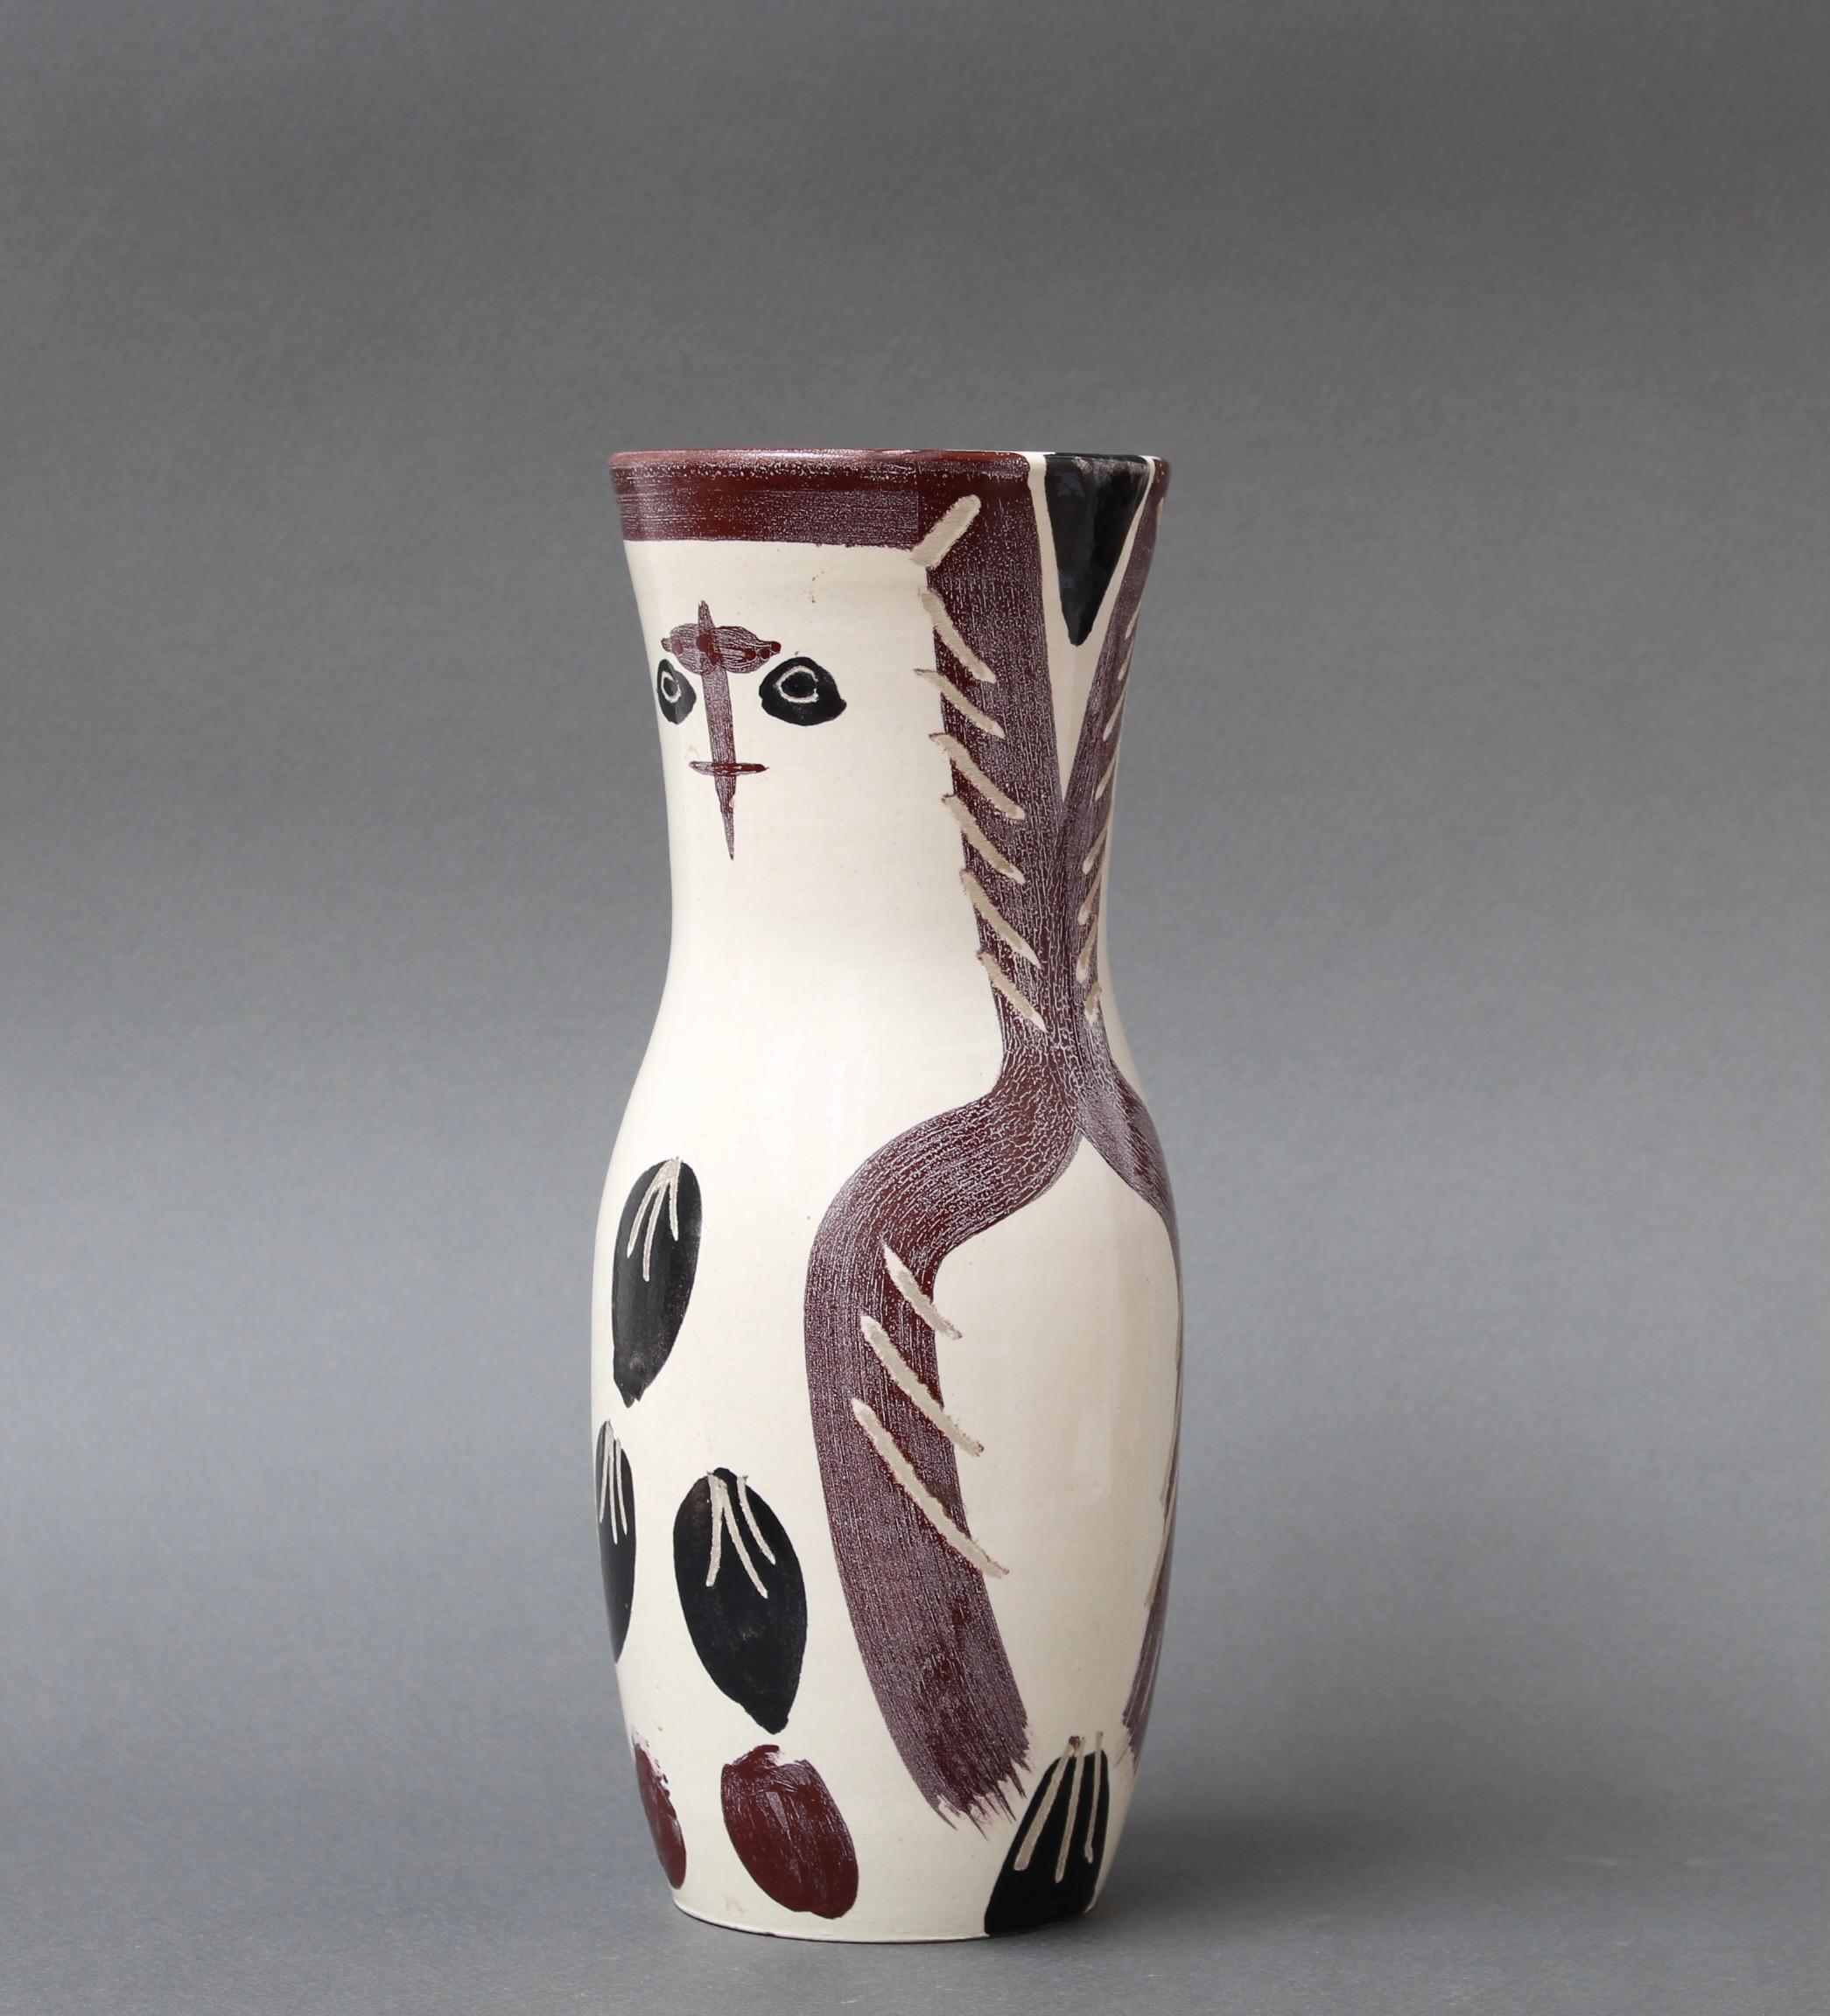 Ceramic Owl Vase (A.R. 135) from the Madoura Pottery by Pablo Picasso For Sale 2